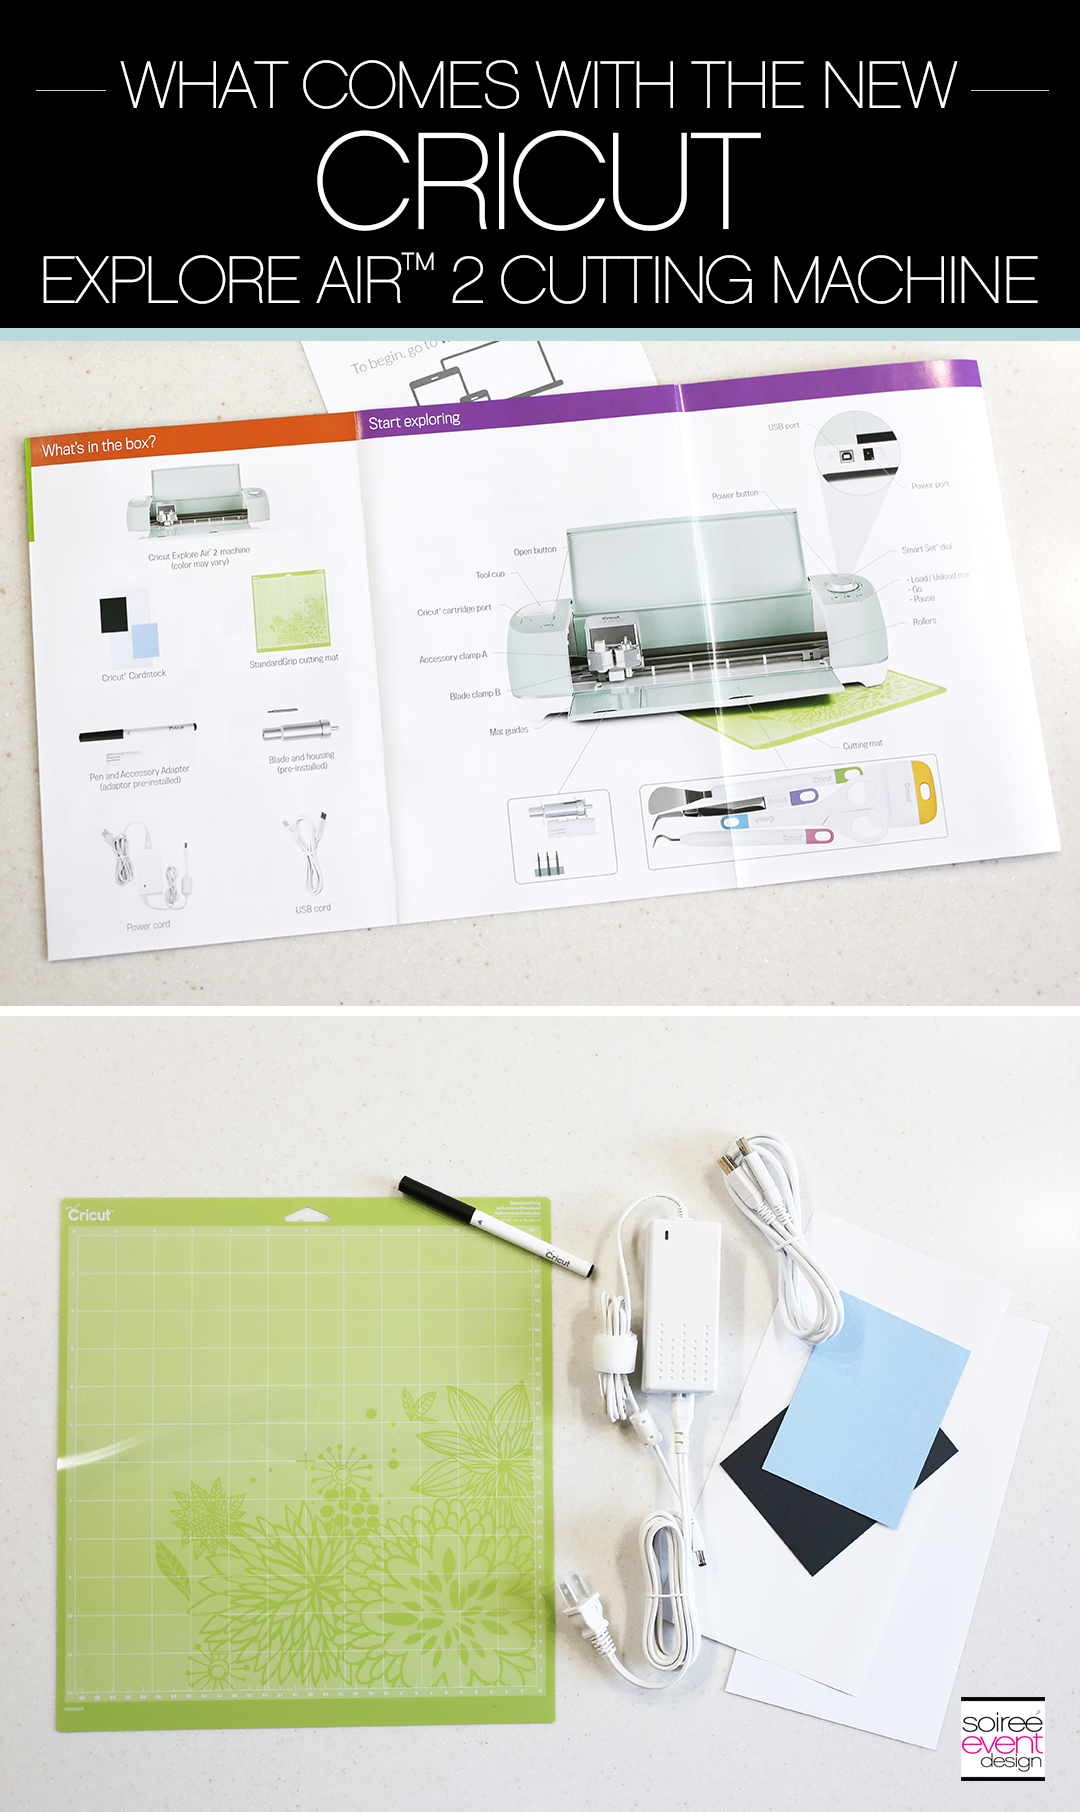 What comes with the New Cricut Explore Air 2